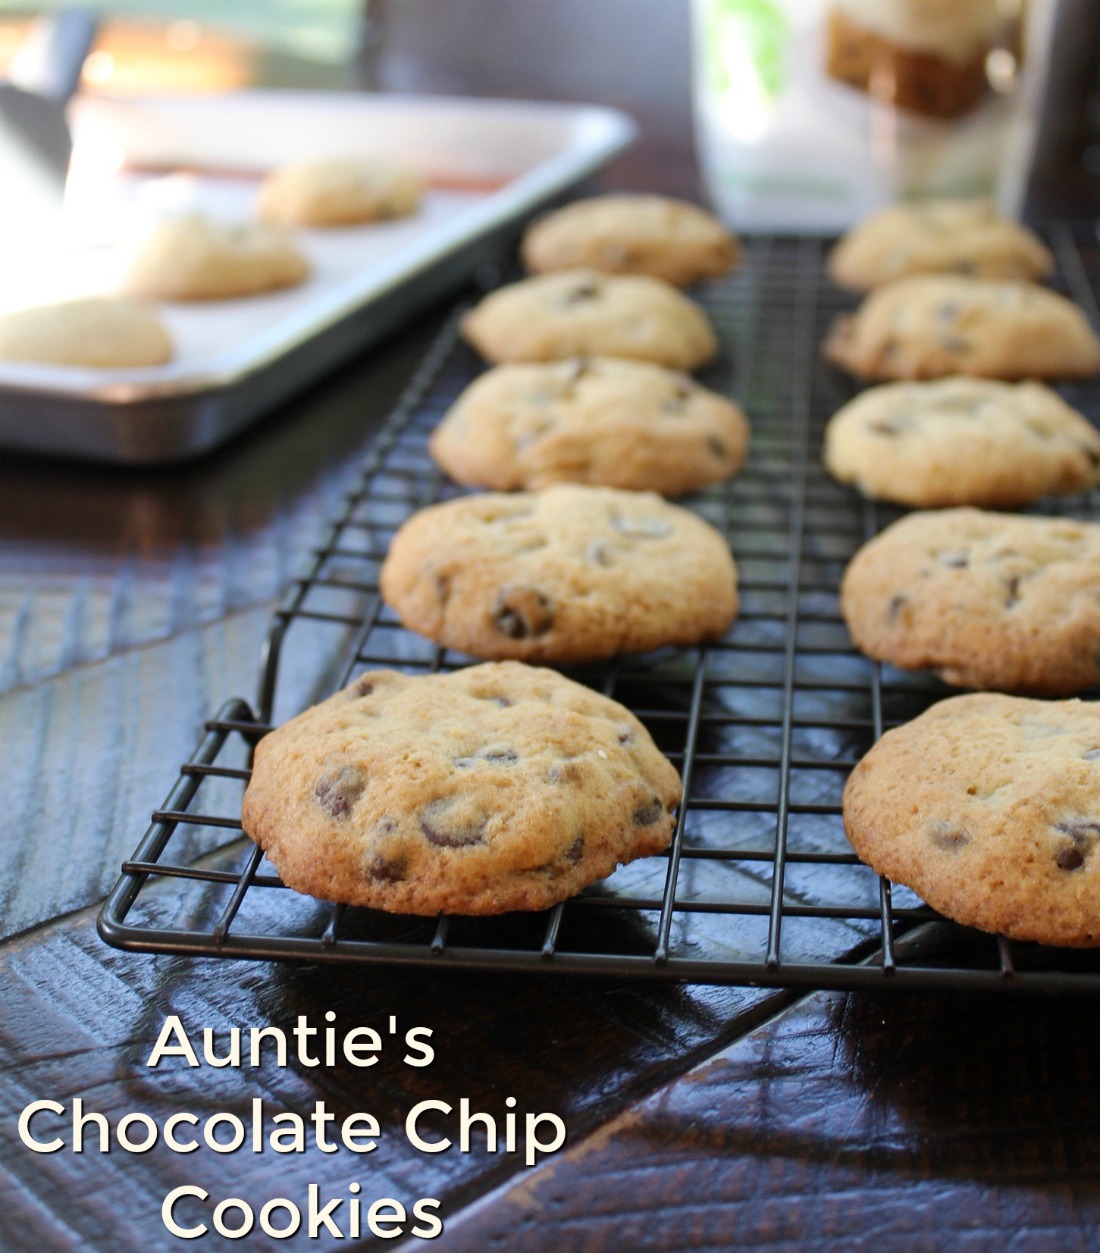 Auntie's Chocolate Chip Cookies